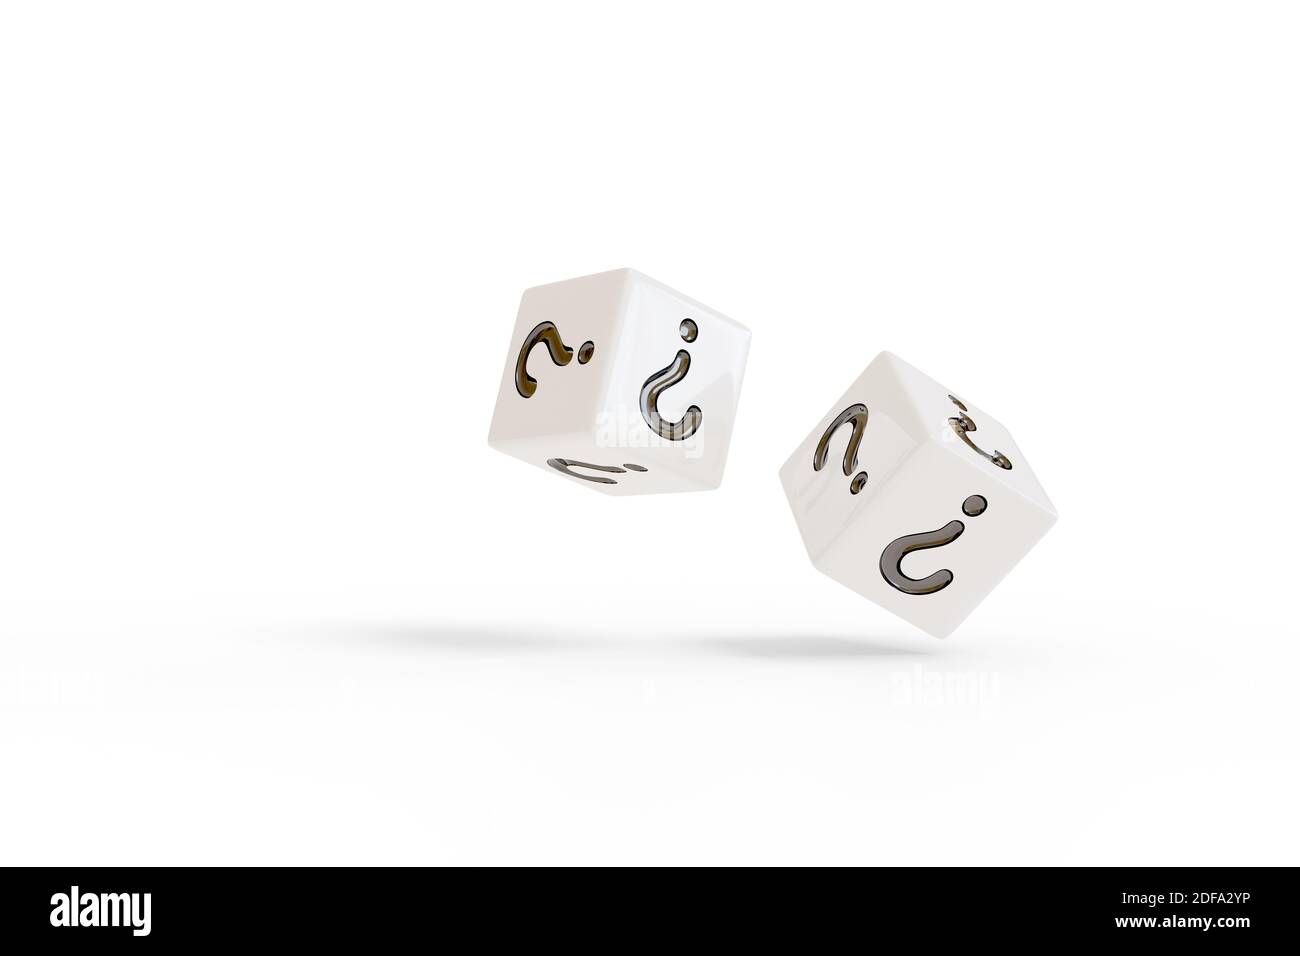 Two rolling white dice with question marks on their faces isolated on white background. Random concept. 3d illustration. Stock Photo